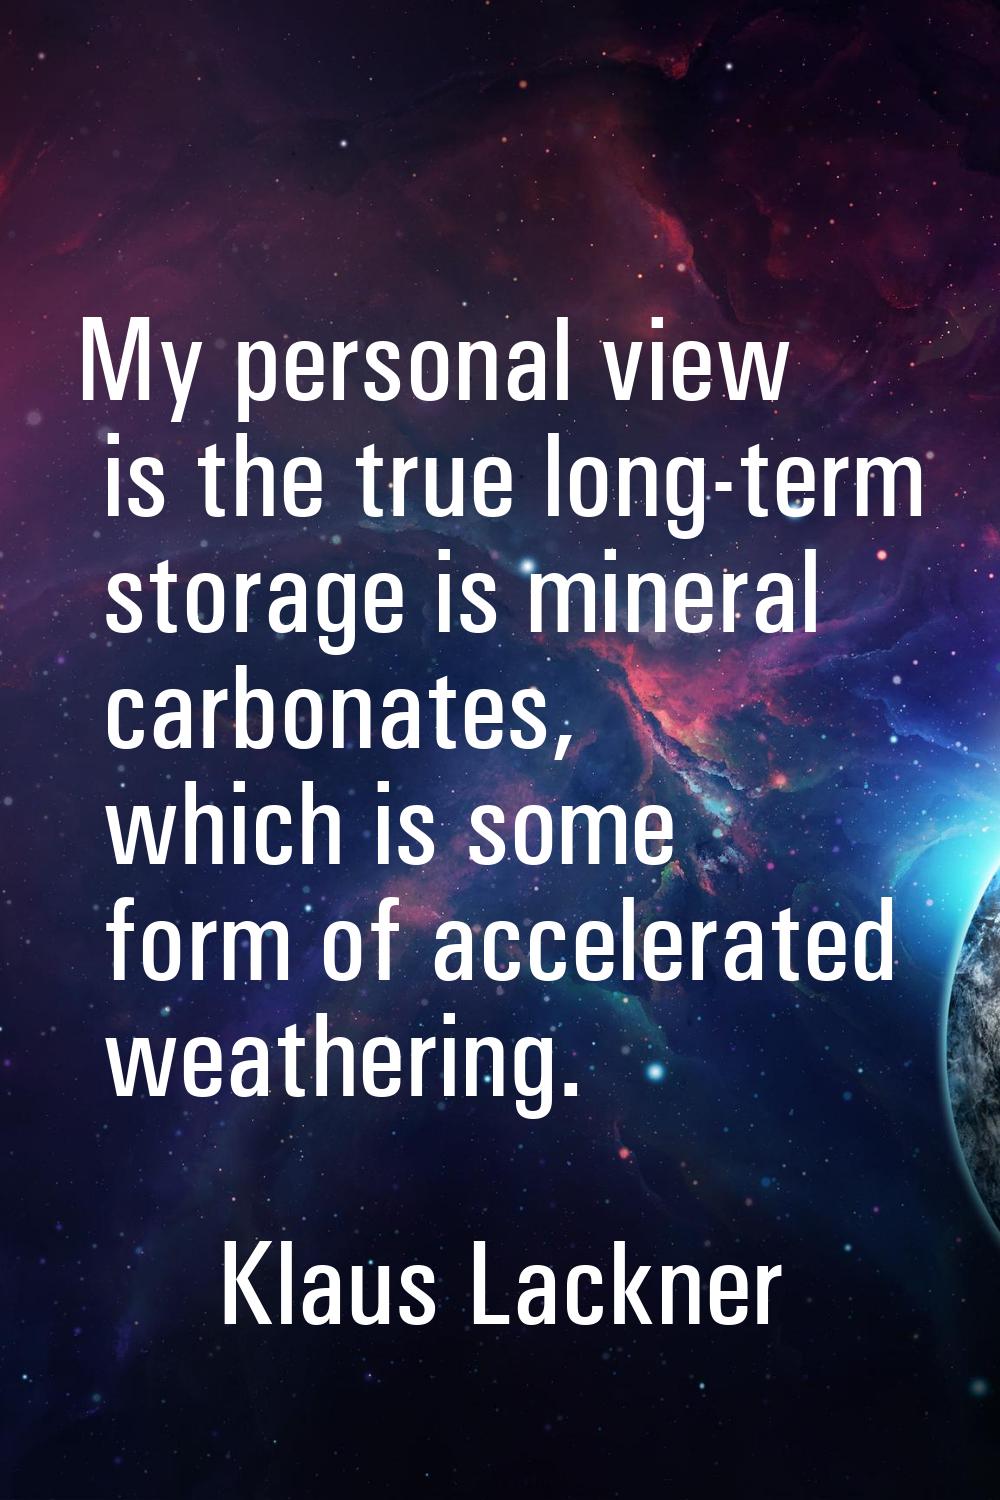 My personal view is the true long-term storage is mineral carbonates, which is some form of acceler